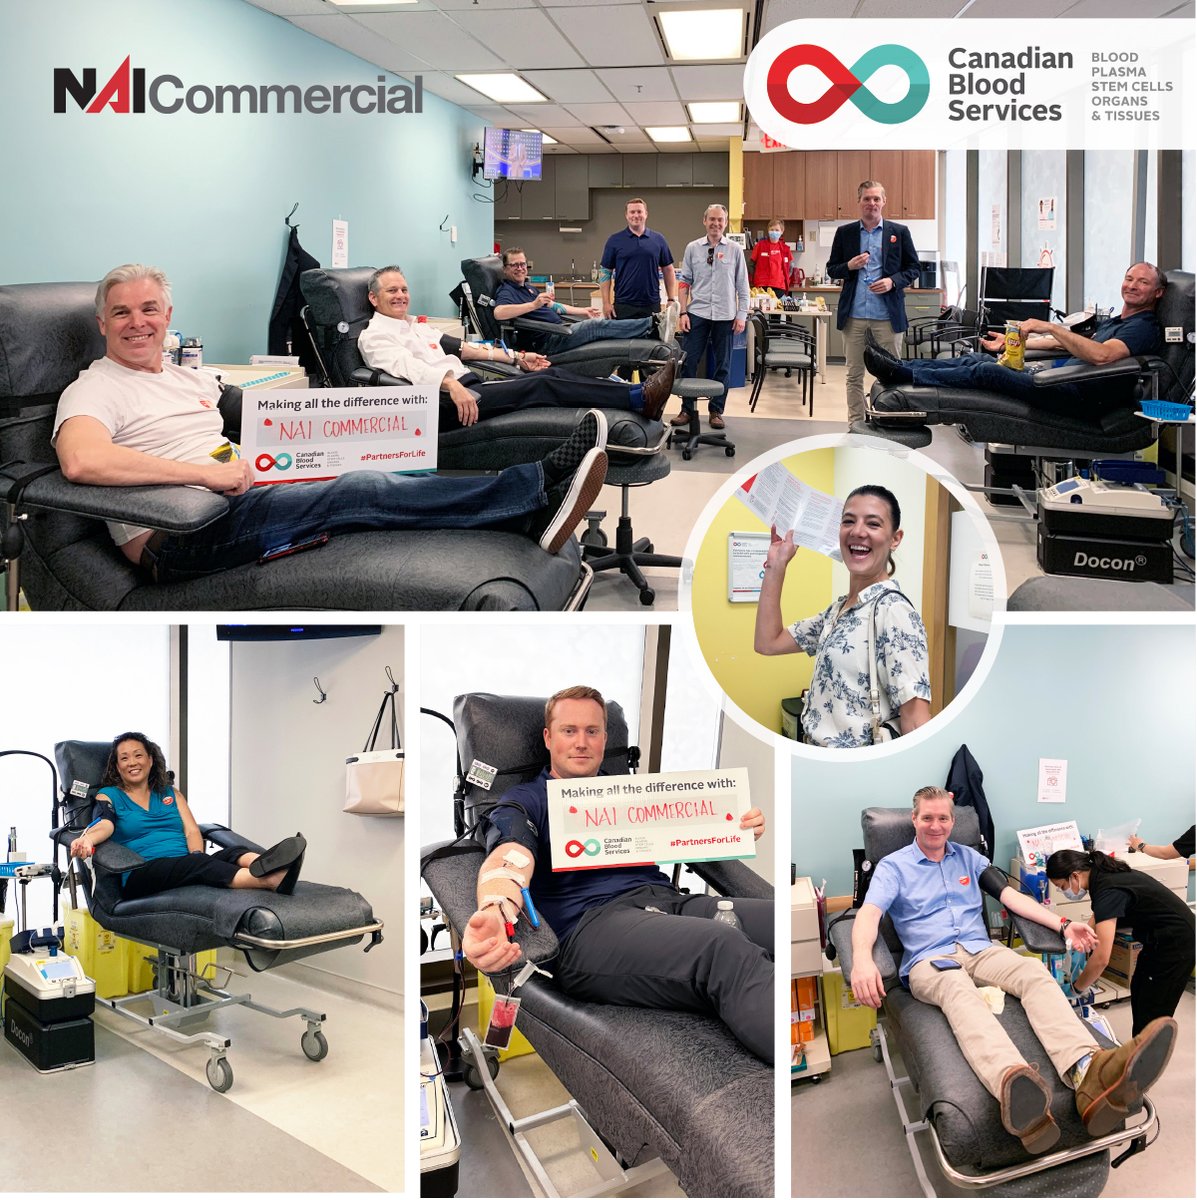 The NAI Commercial Vancouver team is making all the difference at Canada Blood Services @CanadasLifeline
#PartnersForLife